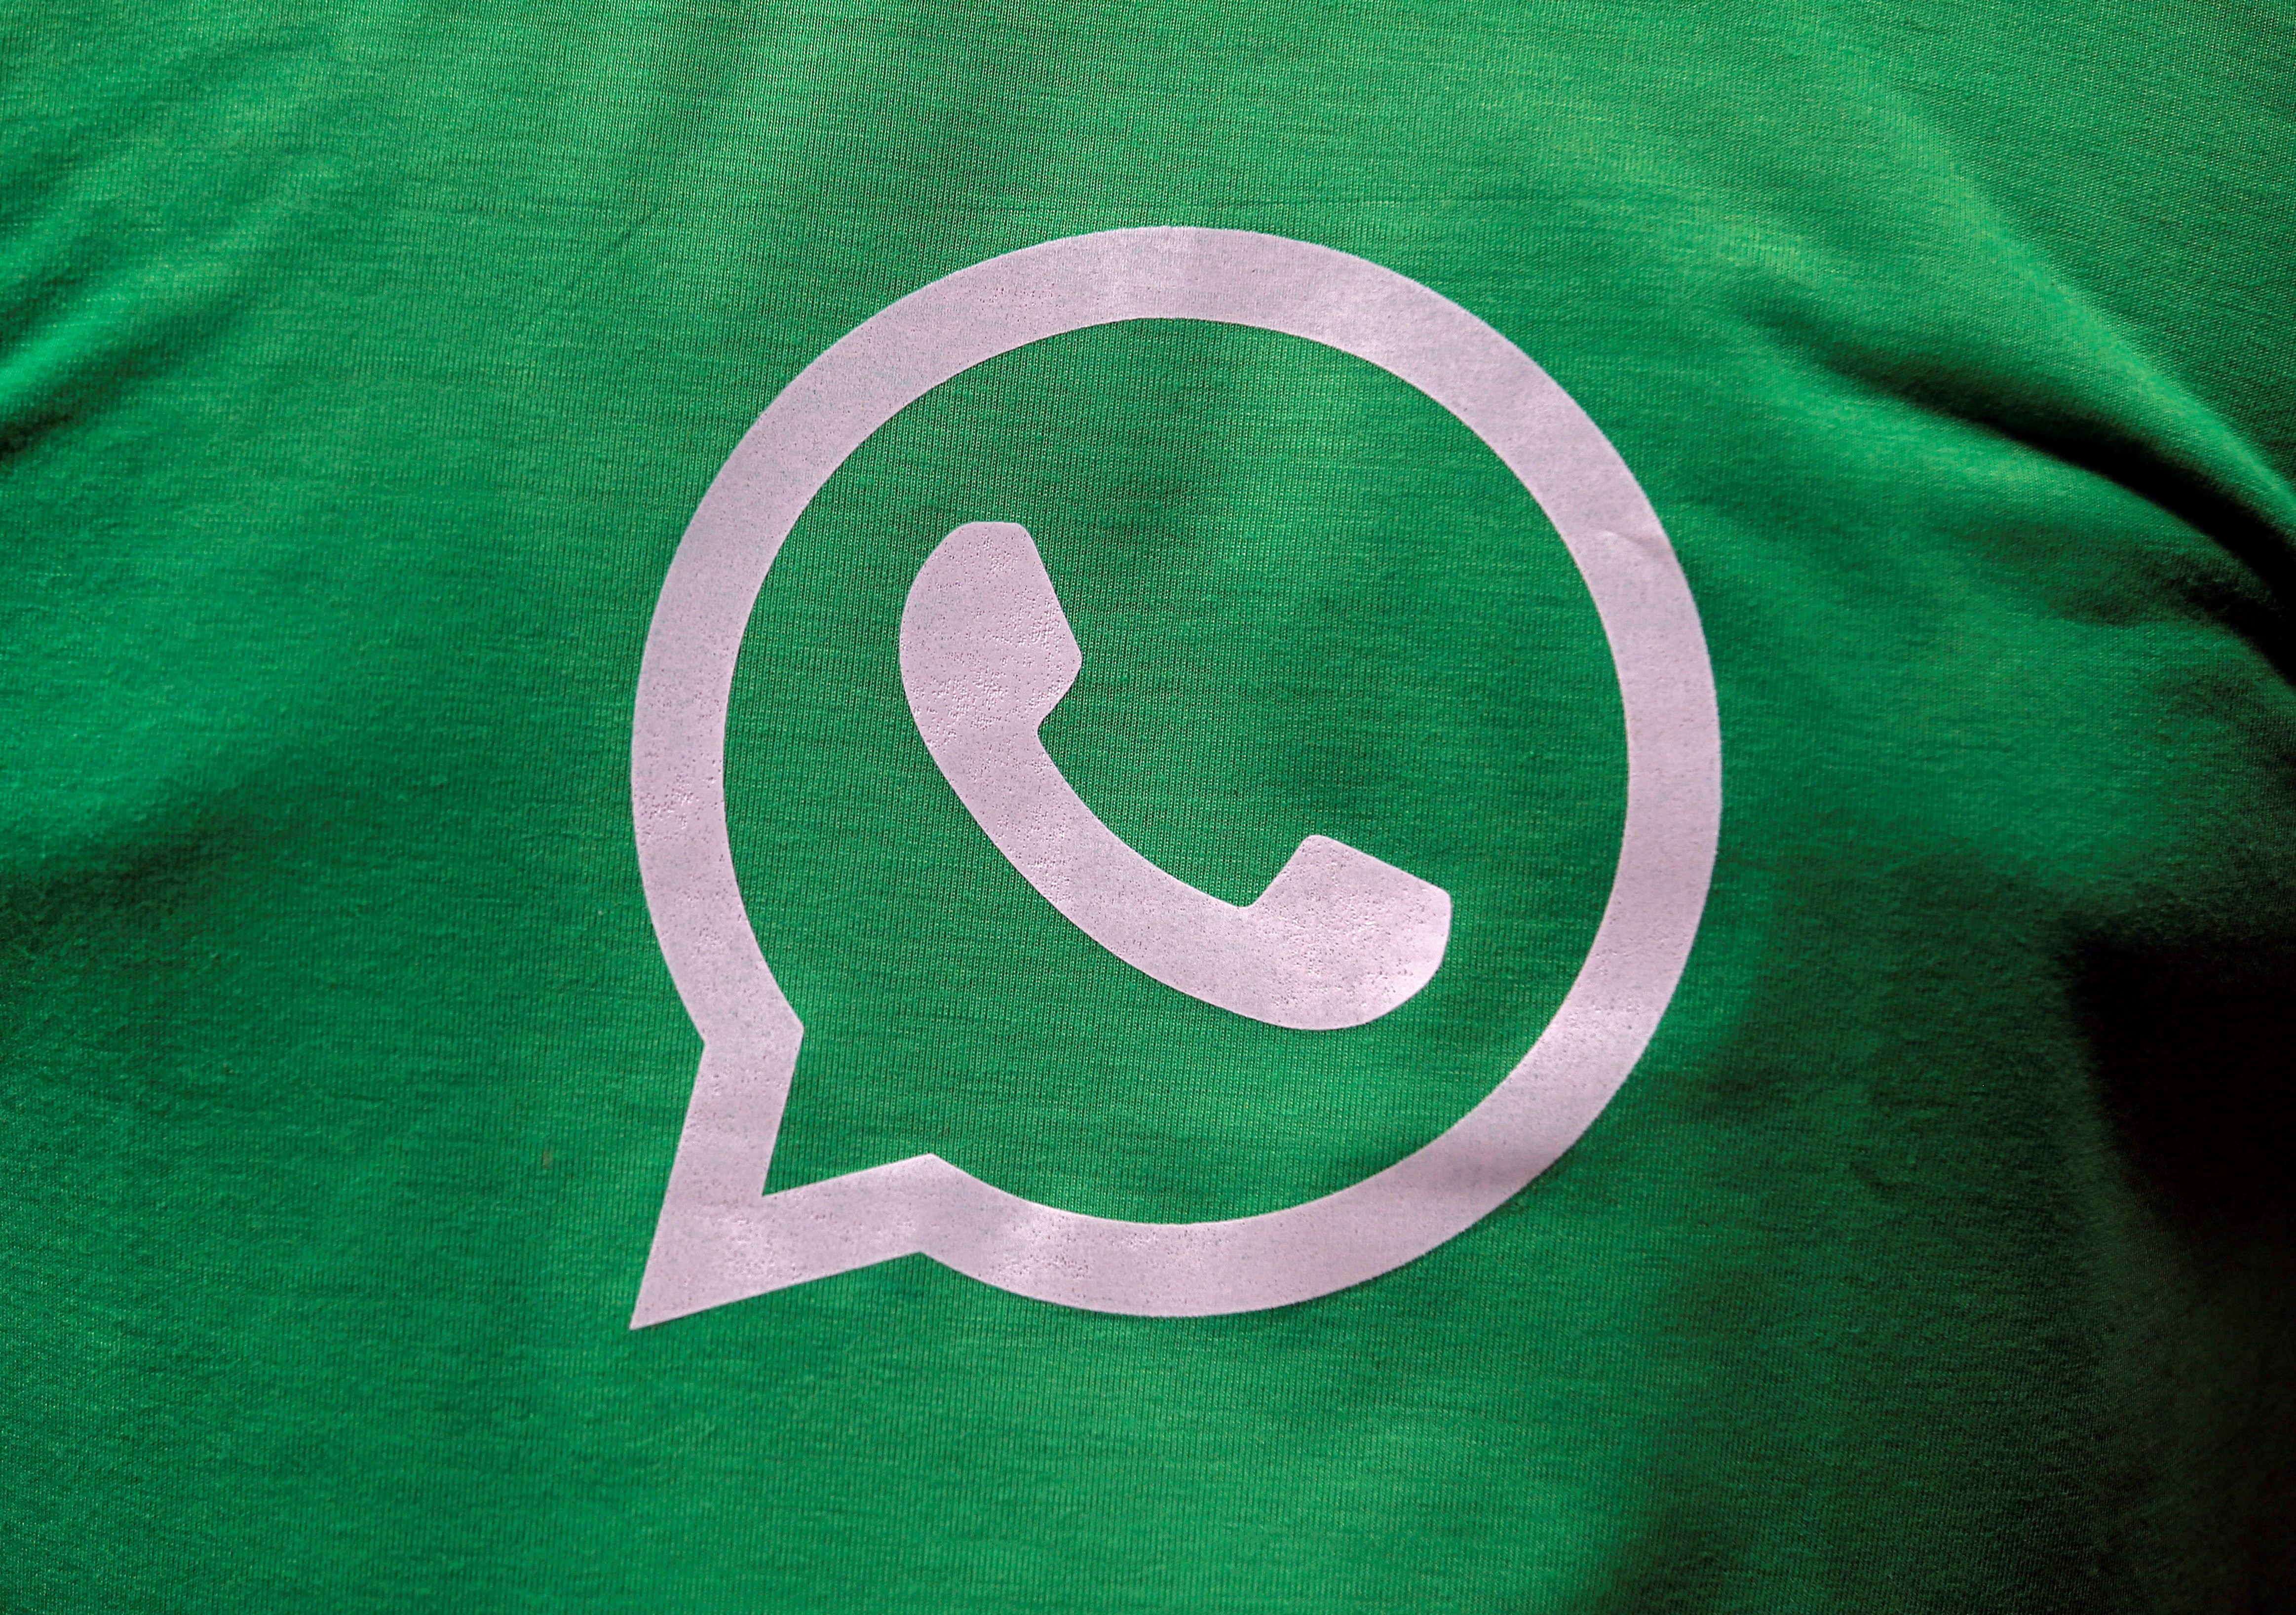 A logo of WhatsApp is pictured on a T-shirt worn by a WhatsApp-Reliance Jio representative during a drive by the two companies to educate users, on the outskirts of Kolkata